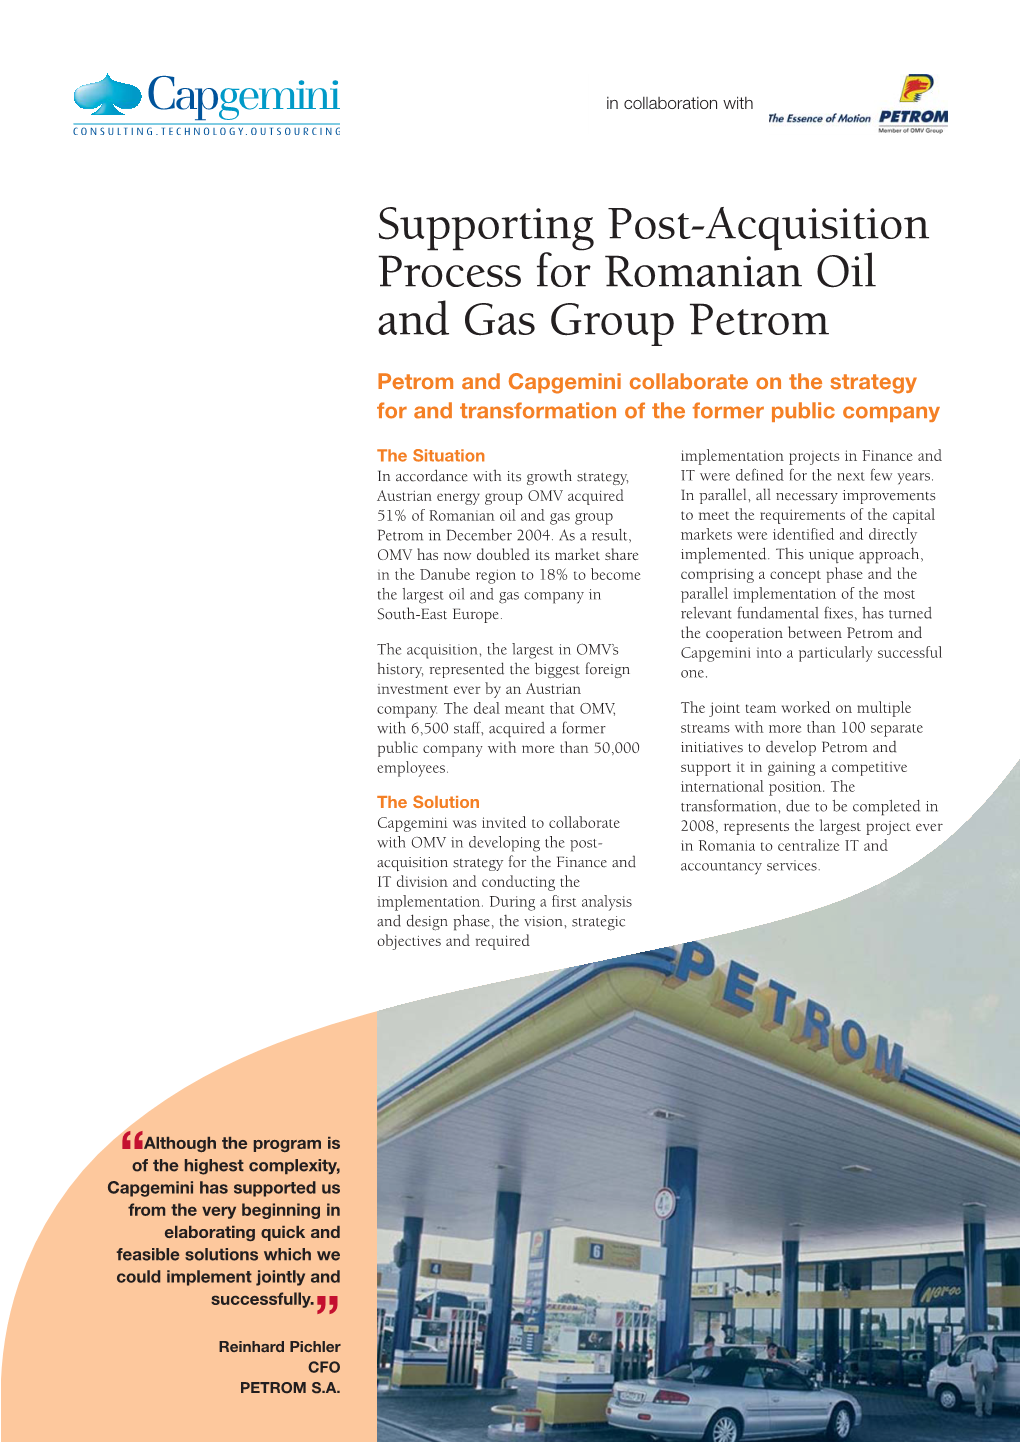 Supporting Post-Acquisition Process for Romanian Oil and Gas Group Petrom